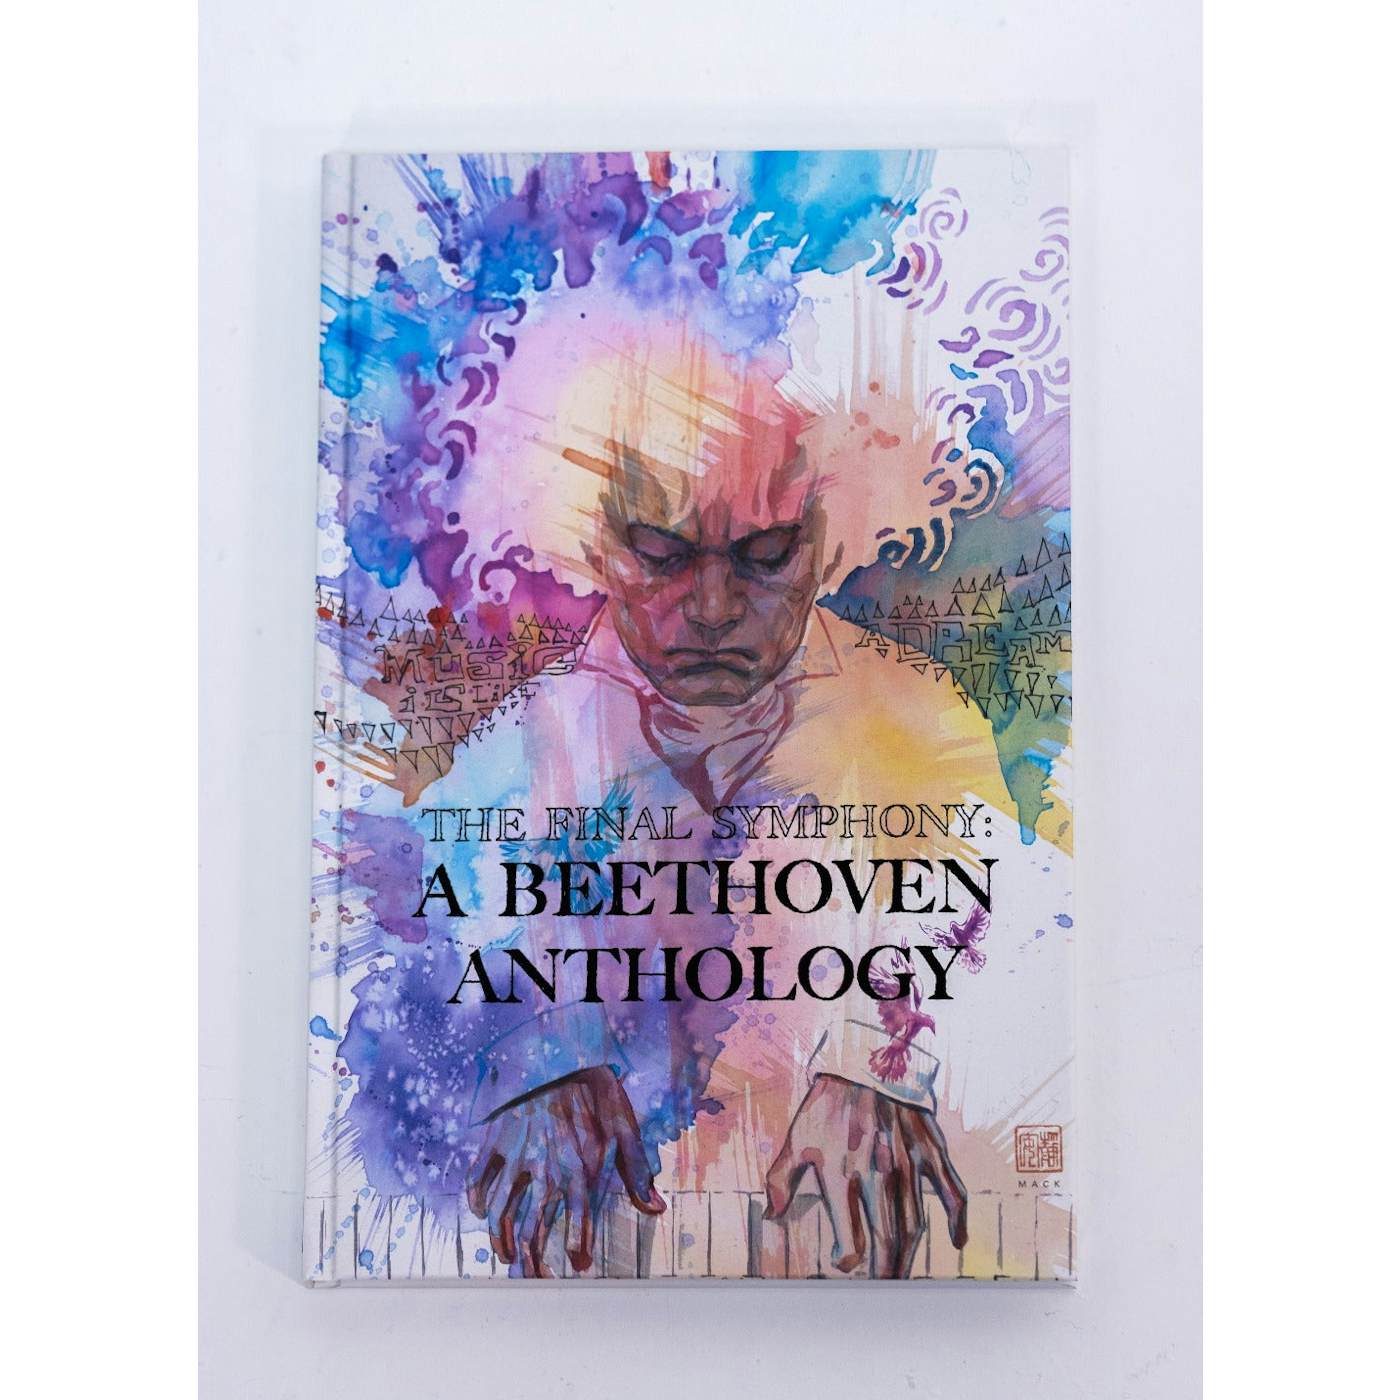 Beethoven: Ludwig van Beethoven - The Final Symphony: A Beethoven Anthology - Deluxe Book